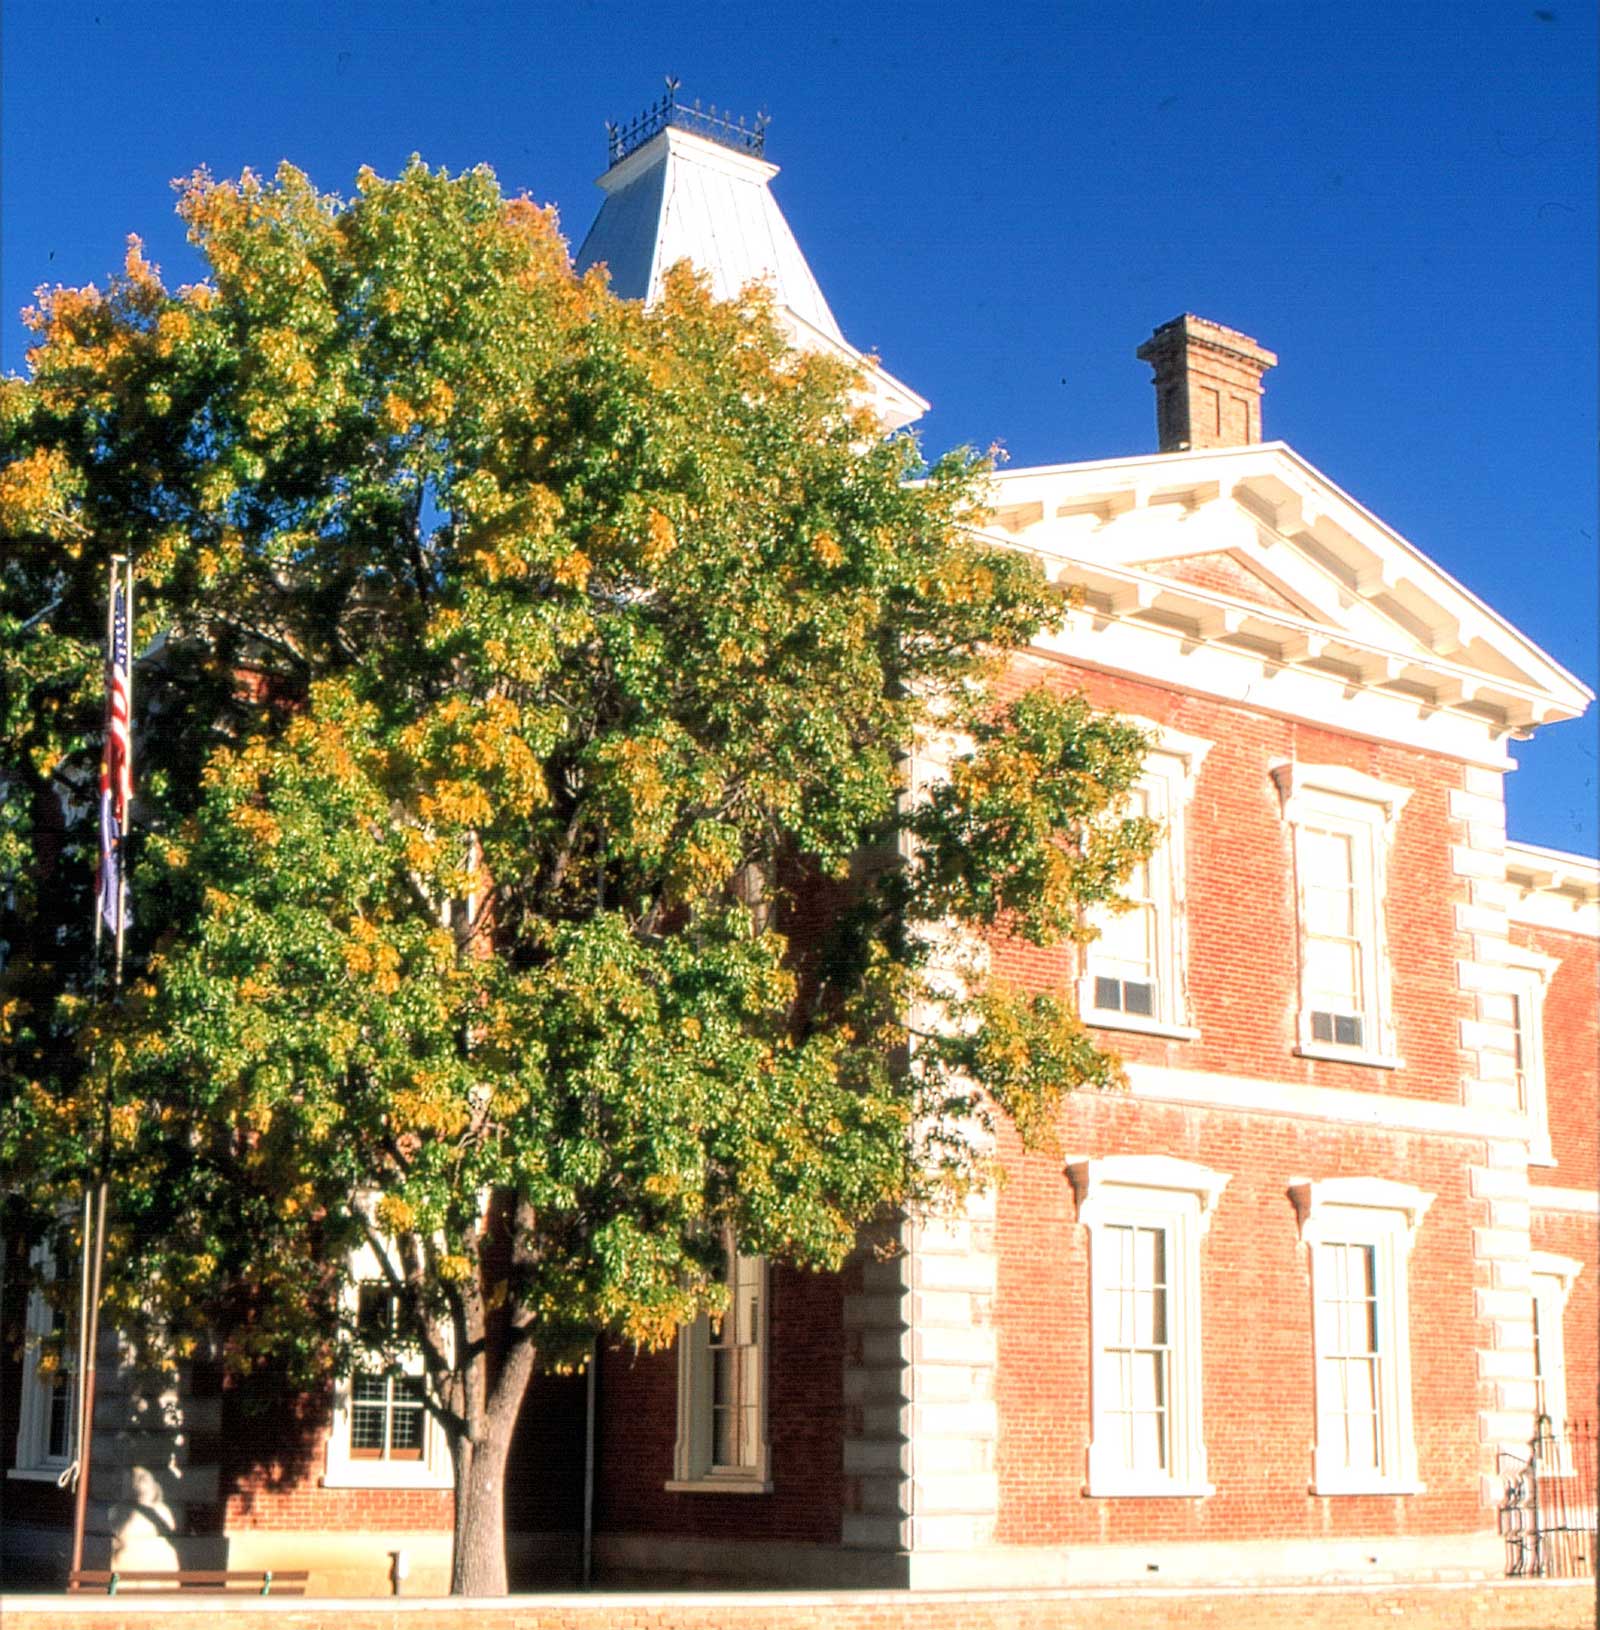 Tombstone Courthouse State Historic Park